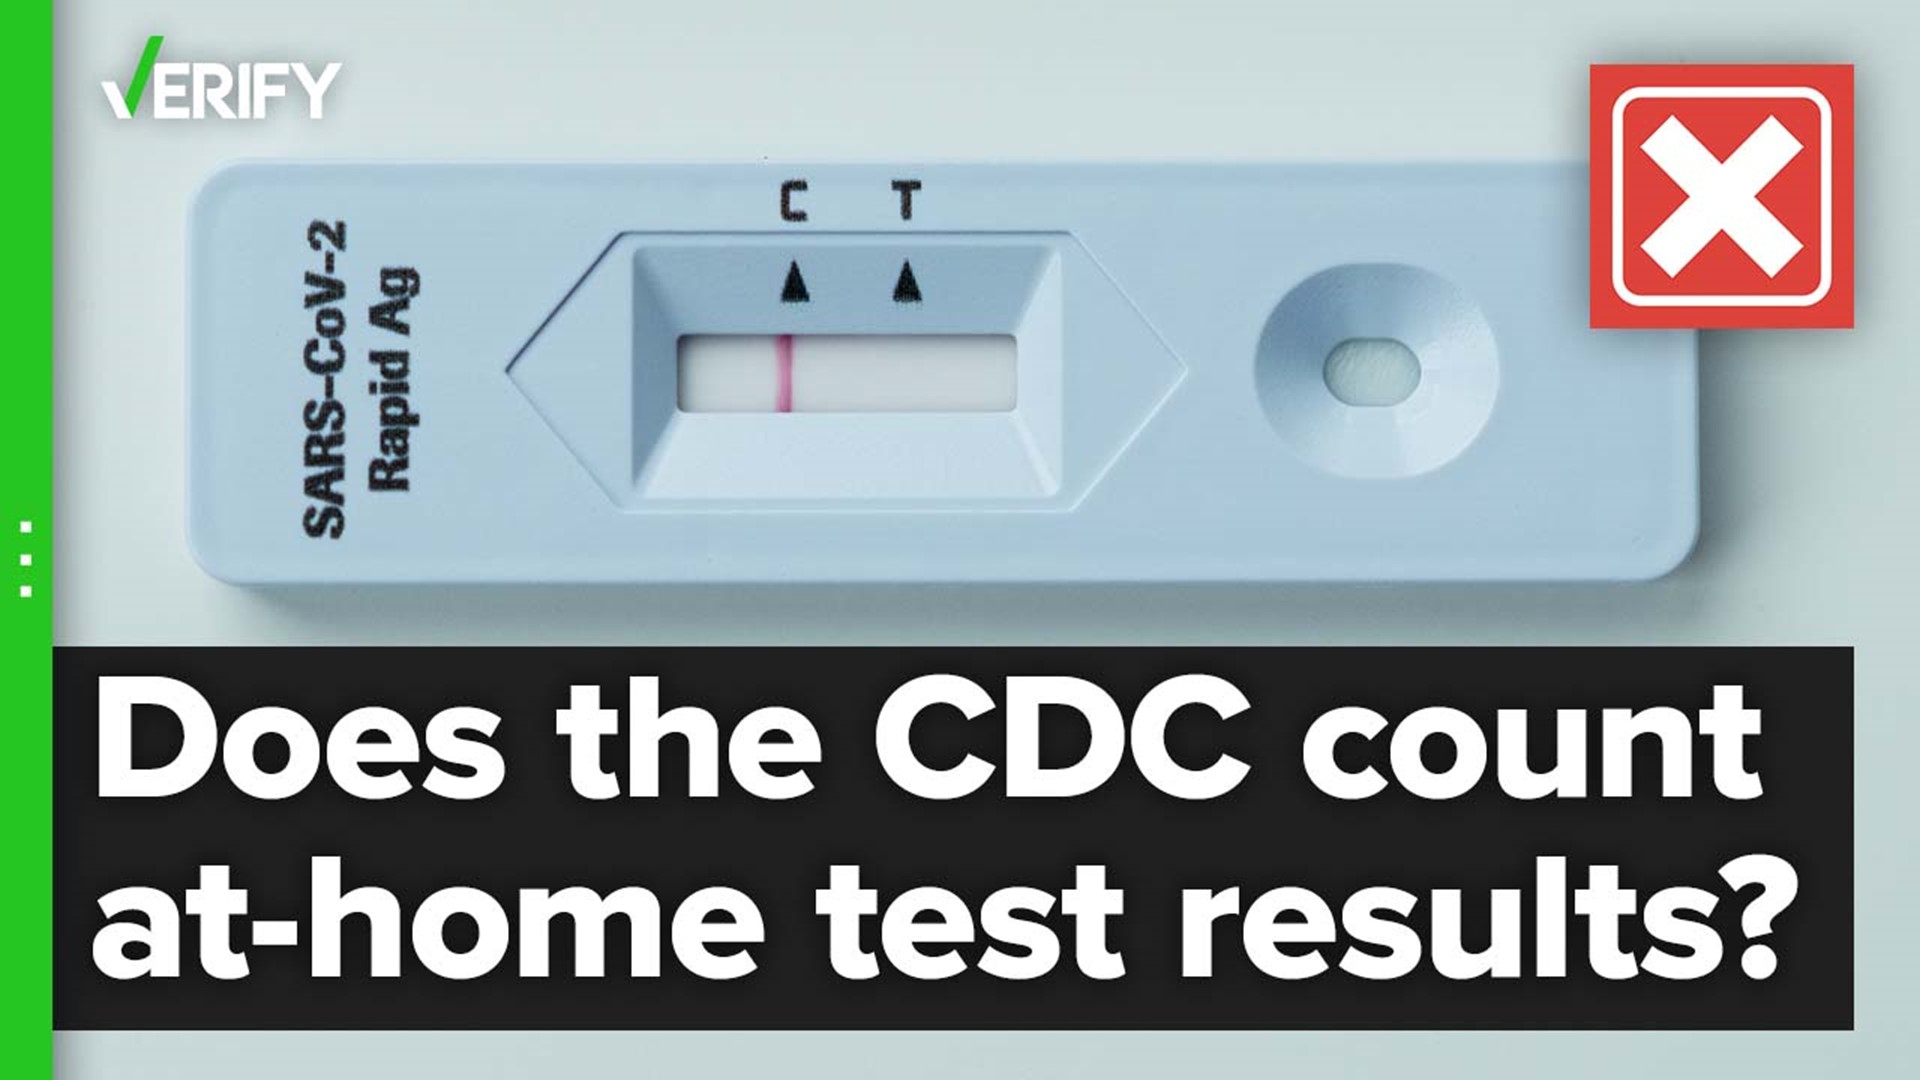 The CDC says its COVID-19 tracking is based on laboratory and on-site test results.